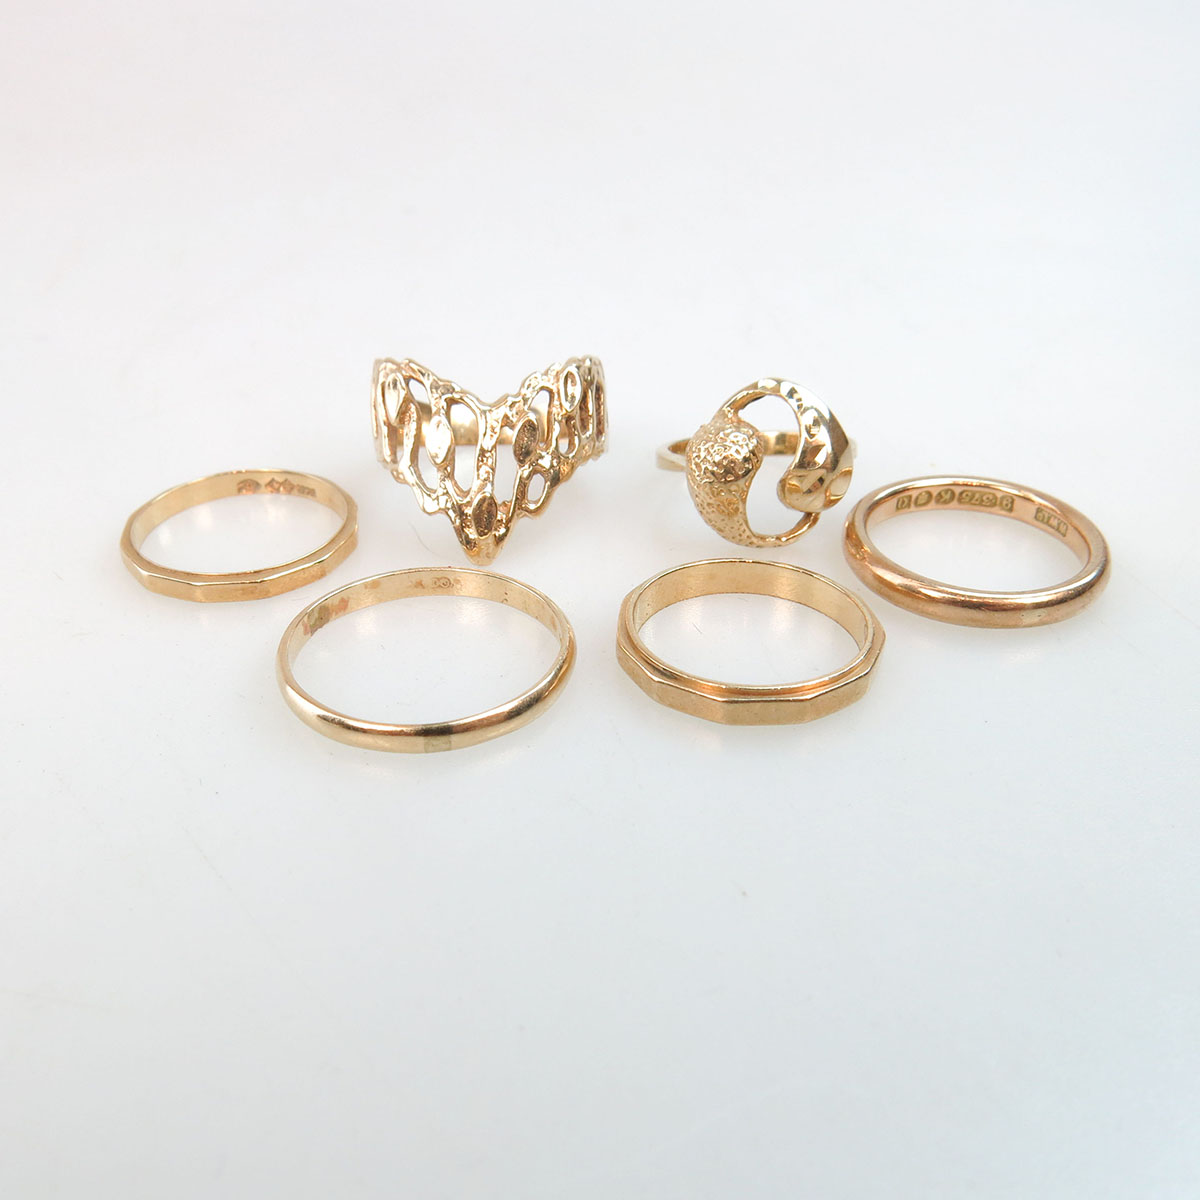 1 x 9k & 5 x 10k Yellow Gold Bands And Rings